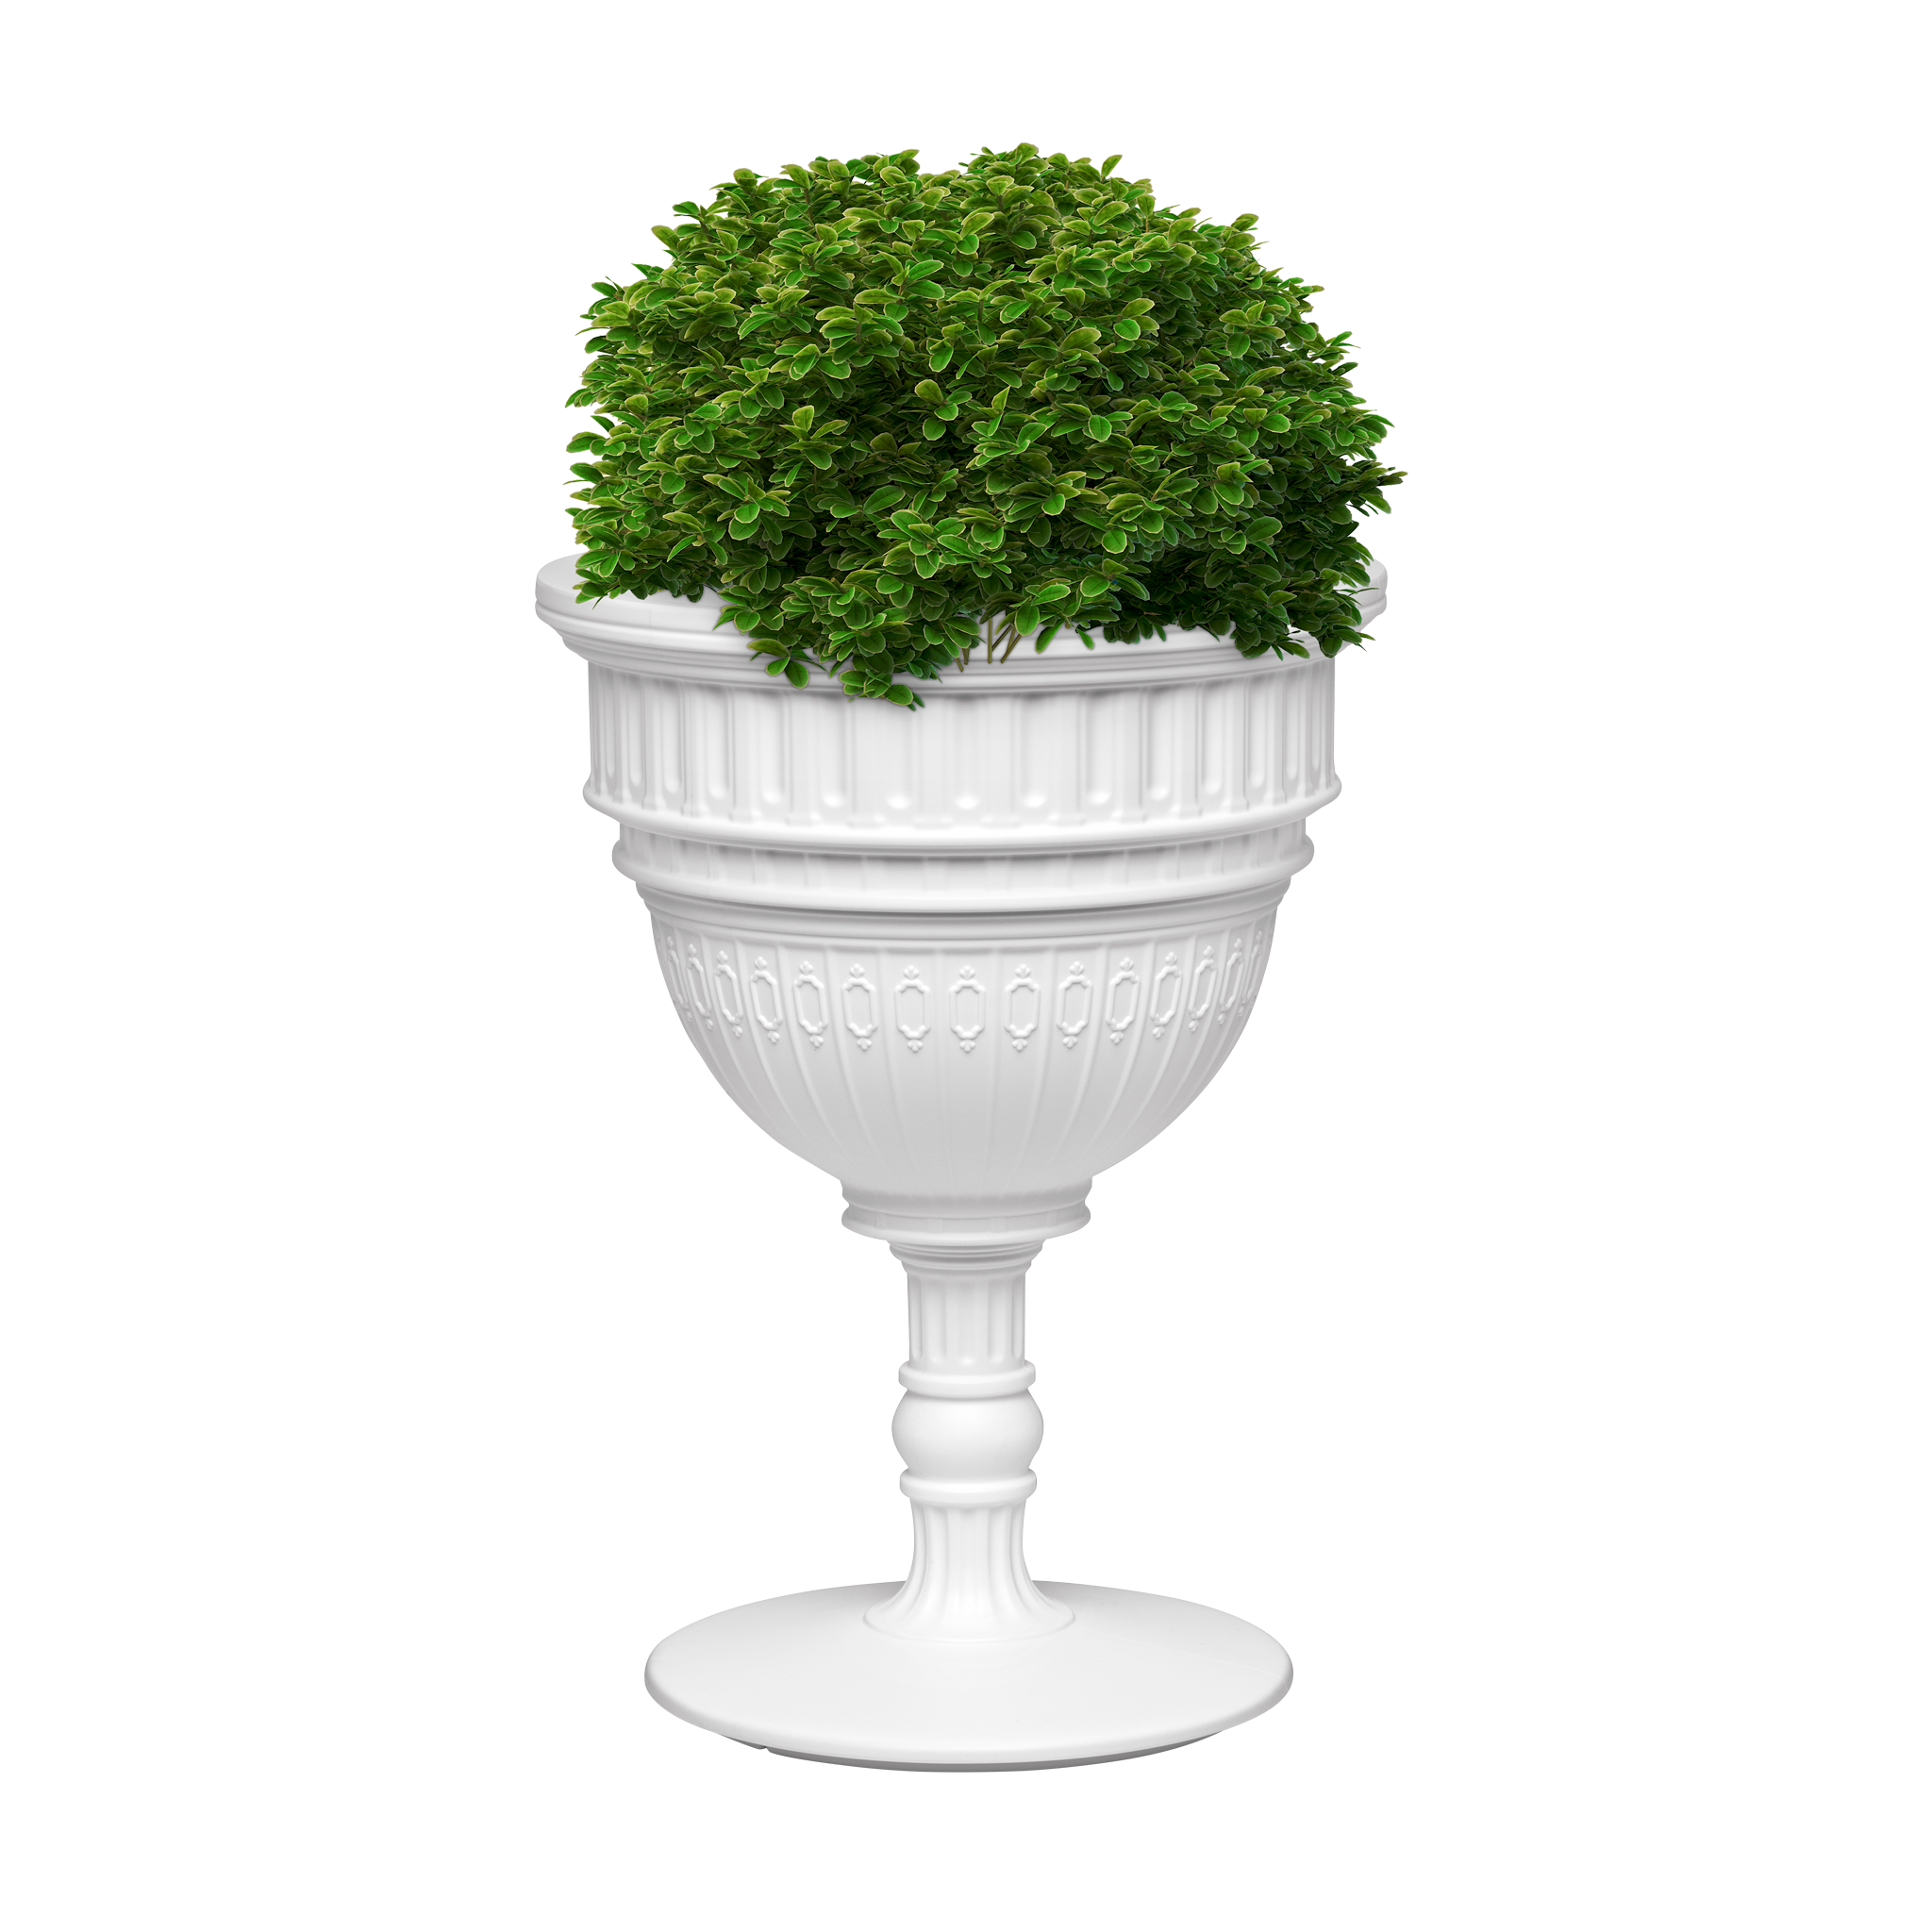 Qeeboo Capitol Planter and Champagne Cooler